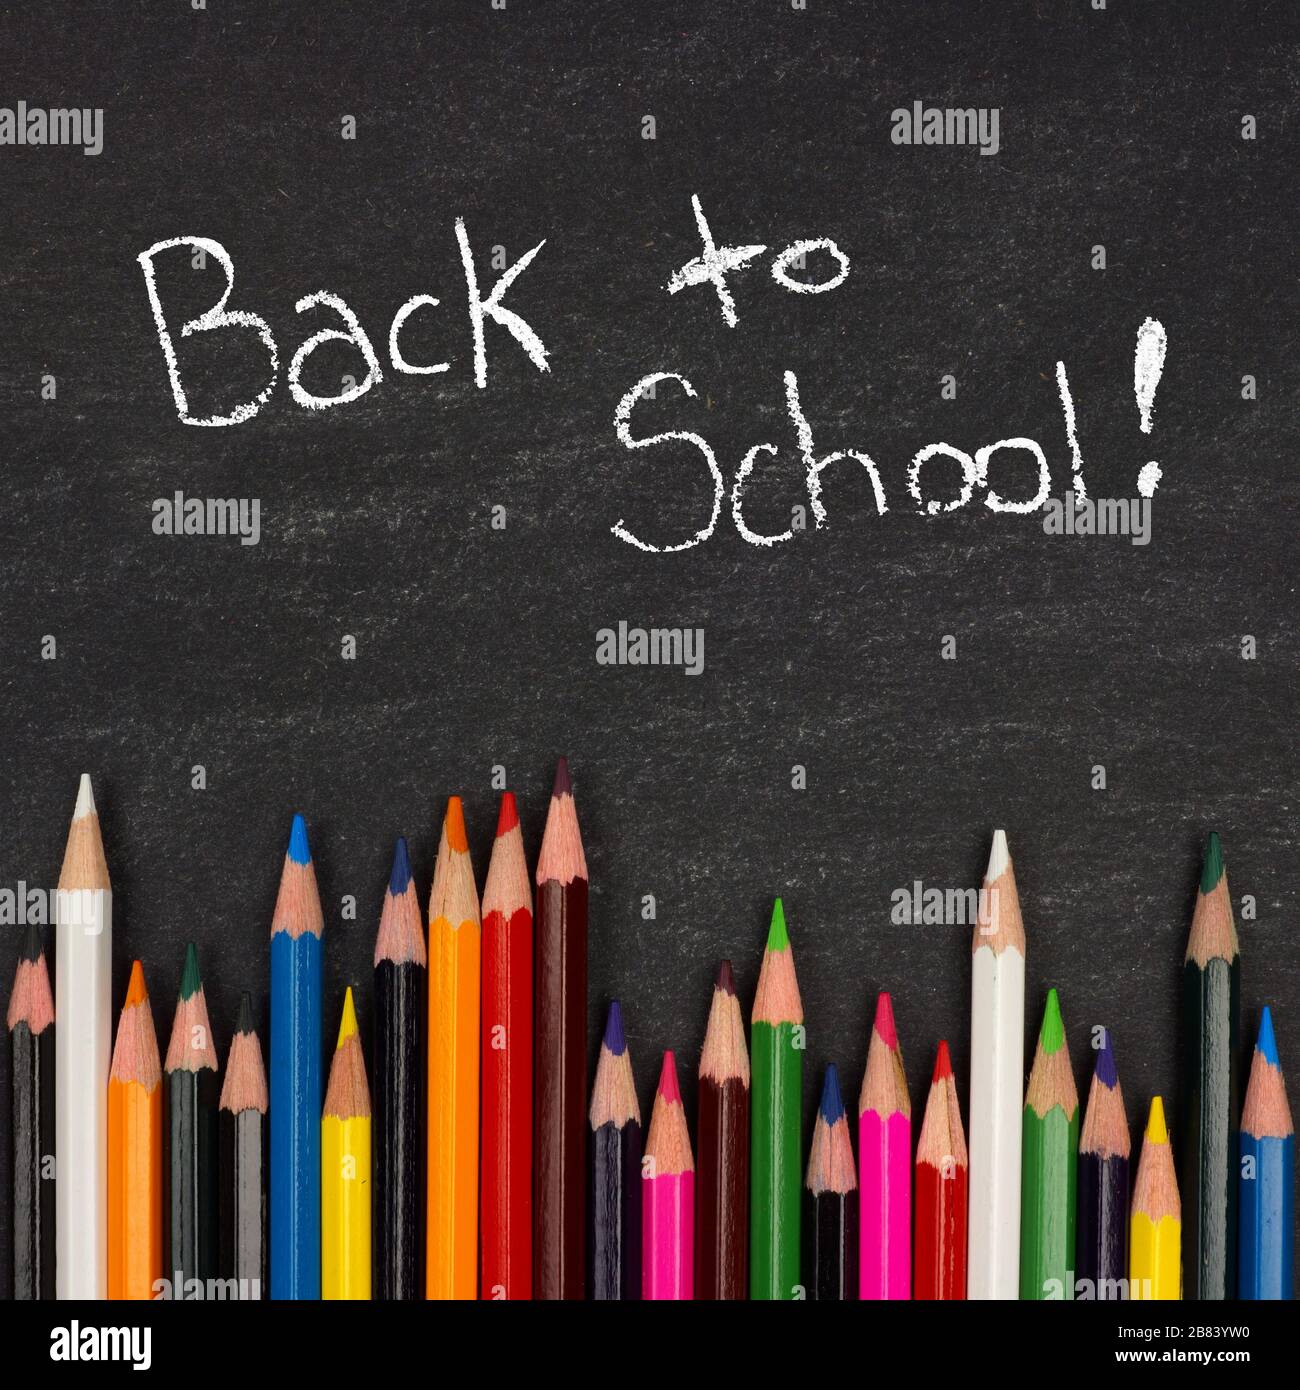 Bottom border of colorful pencil crayons against a blackboard with Back to School writing in chalk Stock Photo